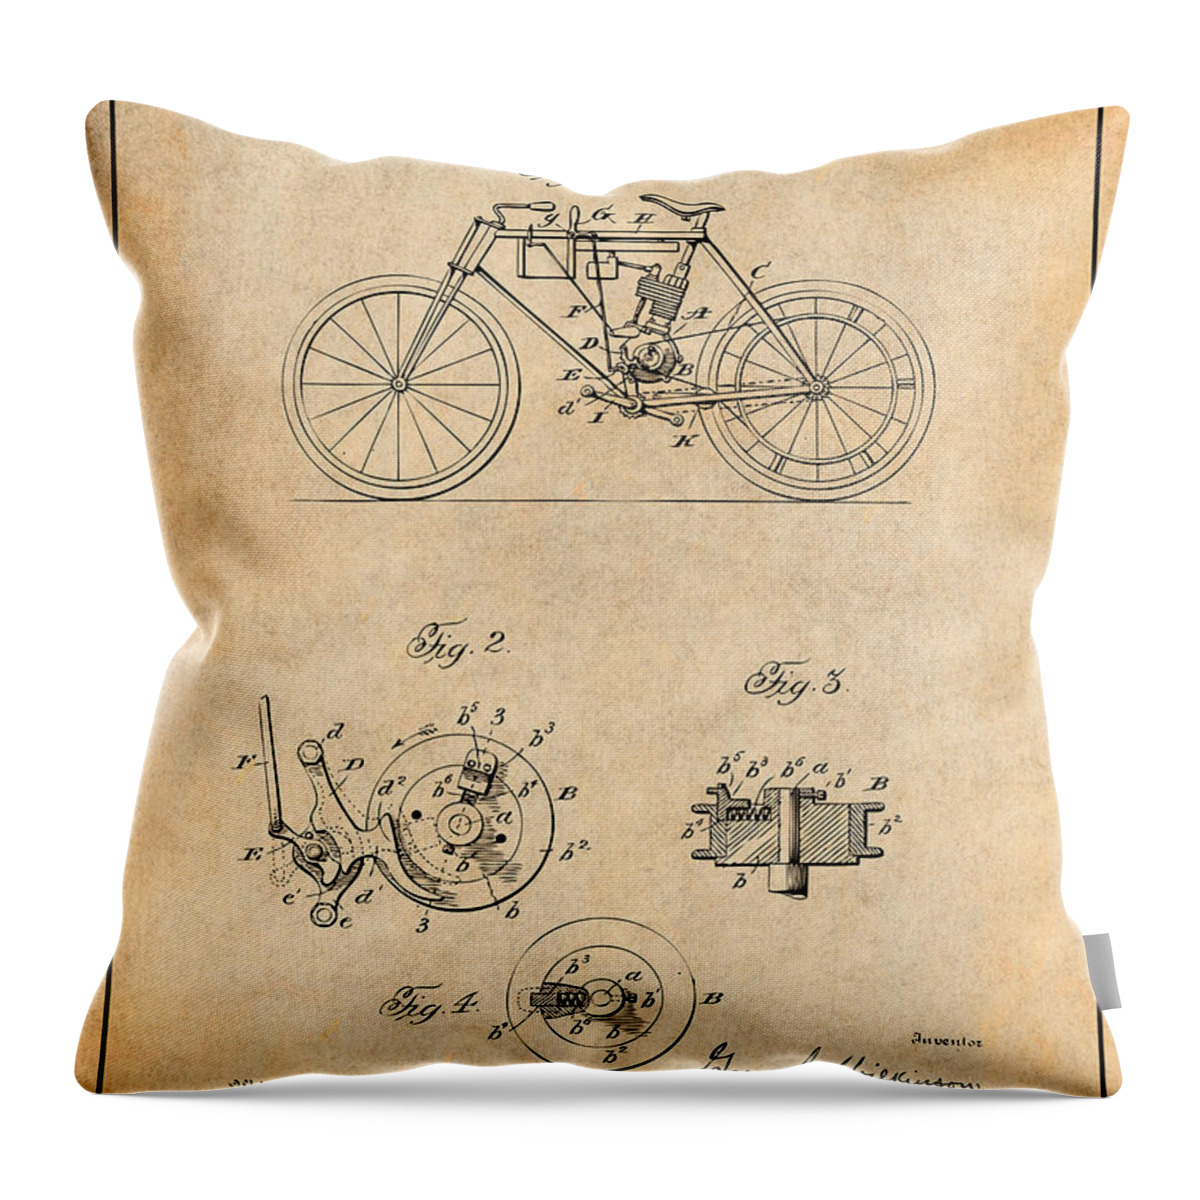 1904 Wilkinson Antique Motorcycle Patent Print Throw Pillow featuring the drawing 1904 Wilkinson Antique Motorcycle Patent Print Antique Paper by Greg Edwards